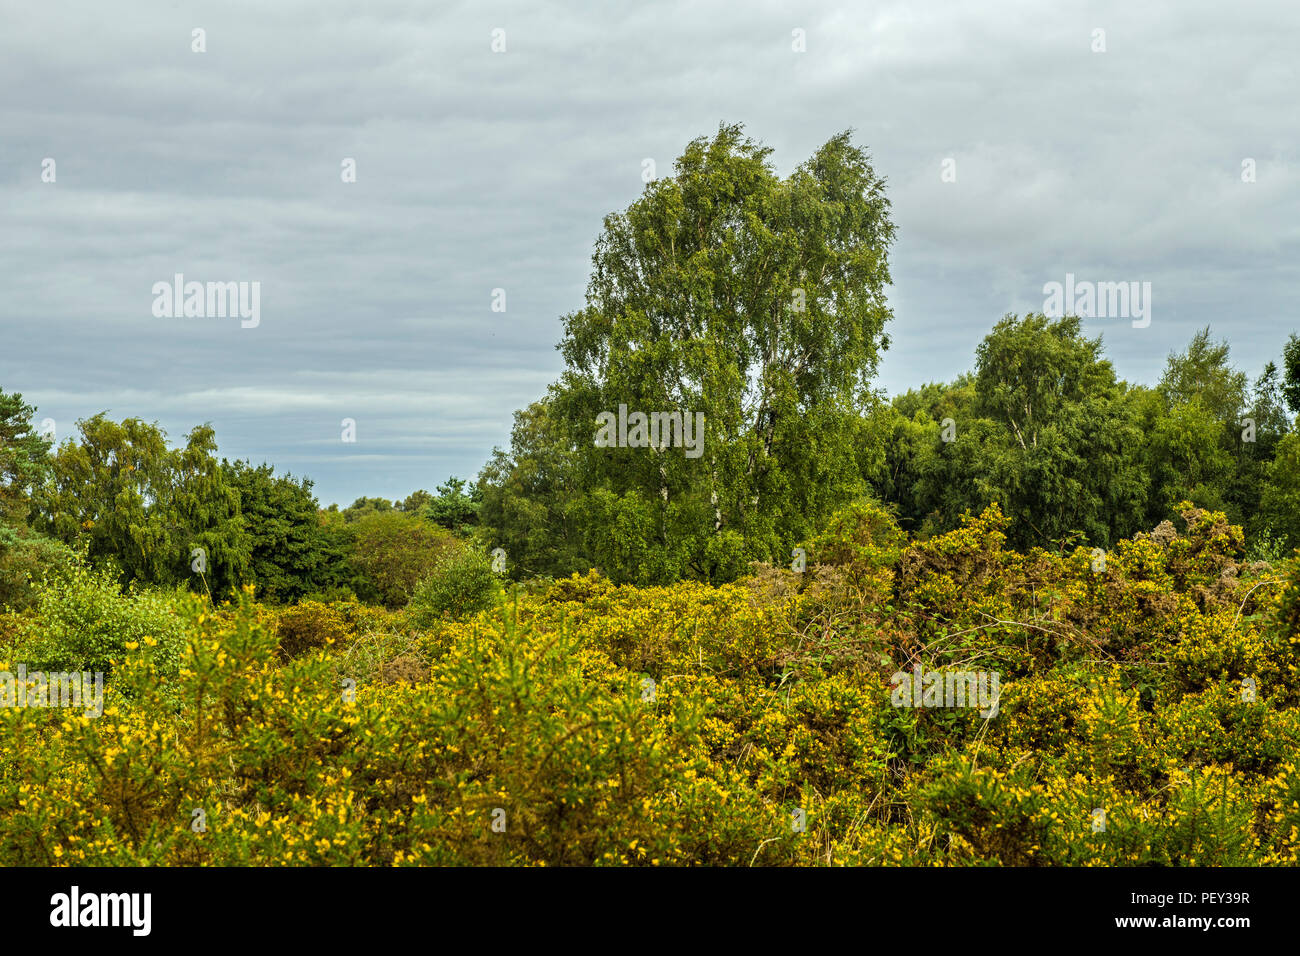 A view of Cannock Chase in Staffordshire England Stock Photo